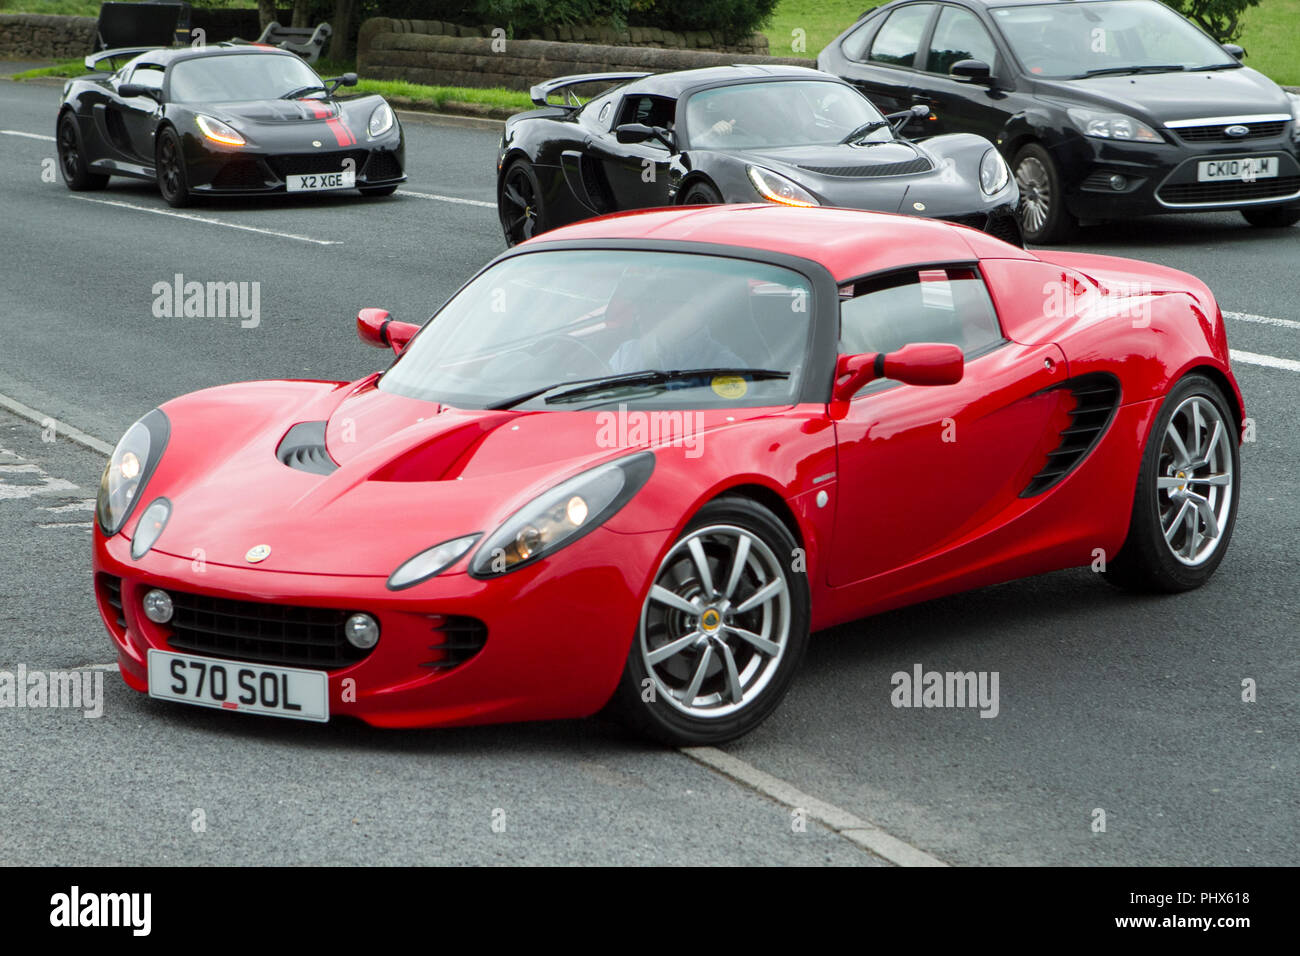 S70SOL red 2002 Lotus Elise 111S Hoghton towers annual classic vintage car rally, UK Stock Photo